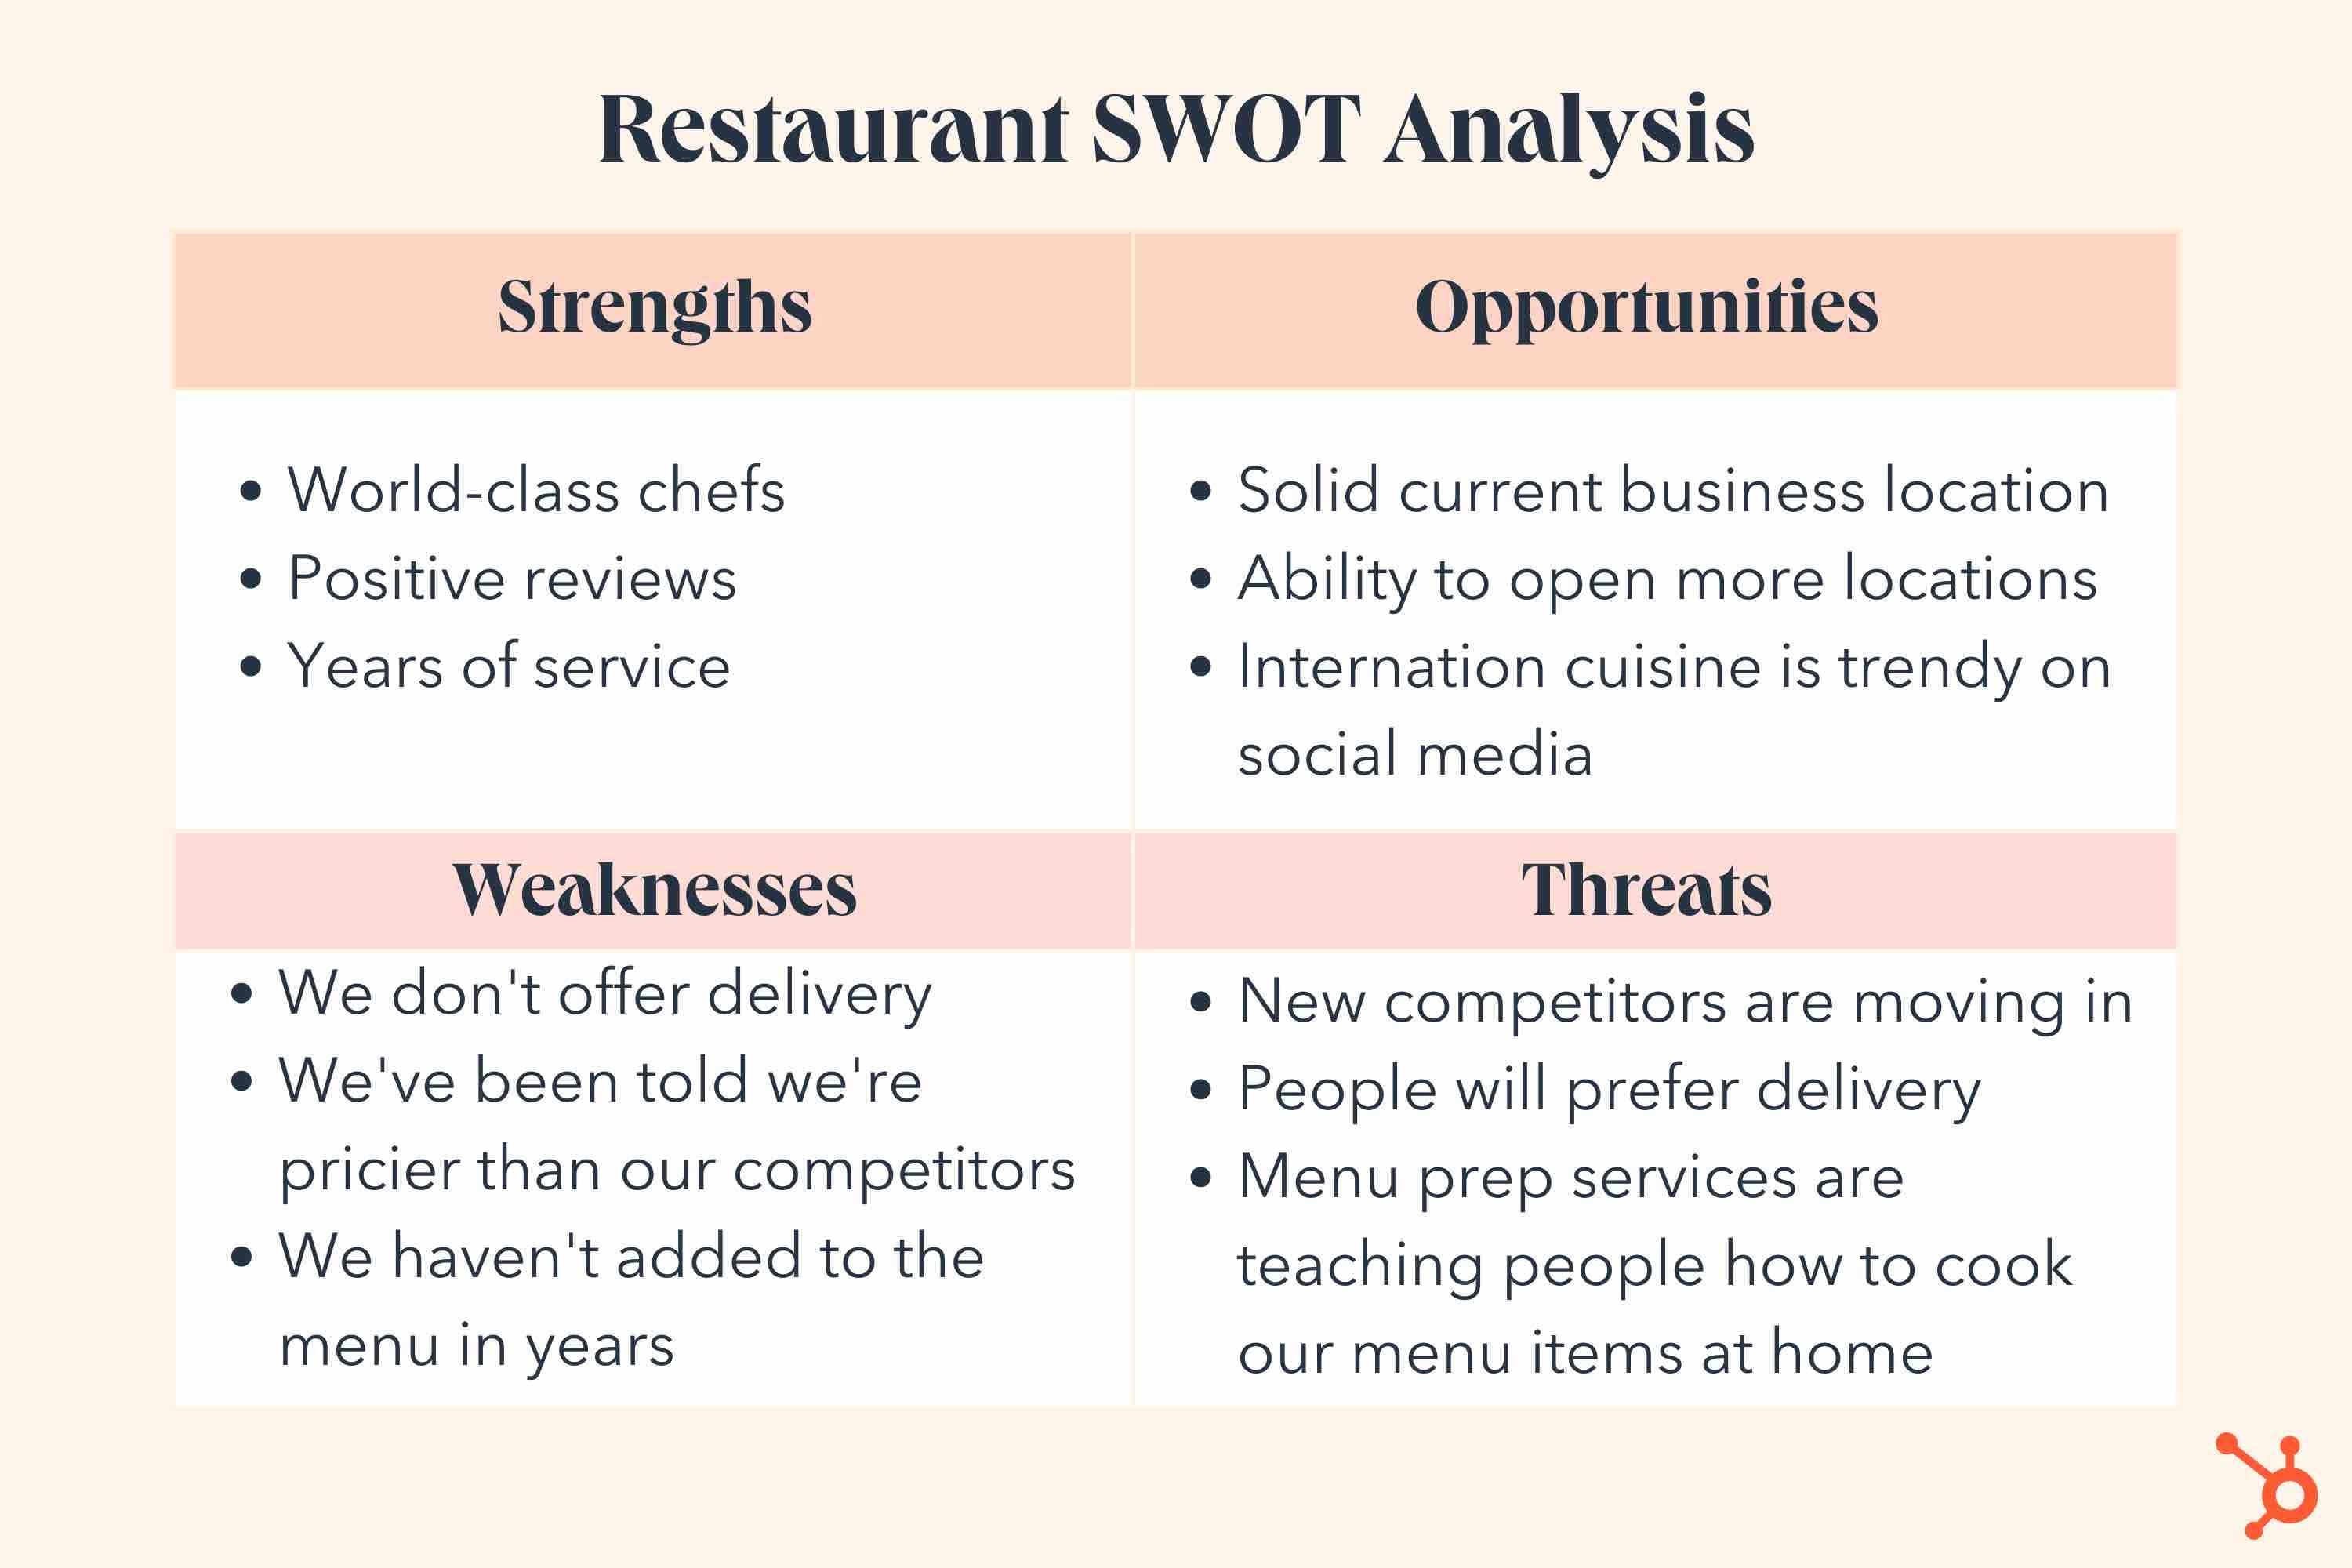 A SWOT analysis example for a restaurant small business.